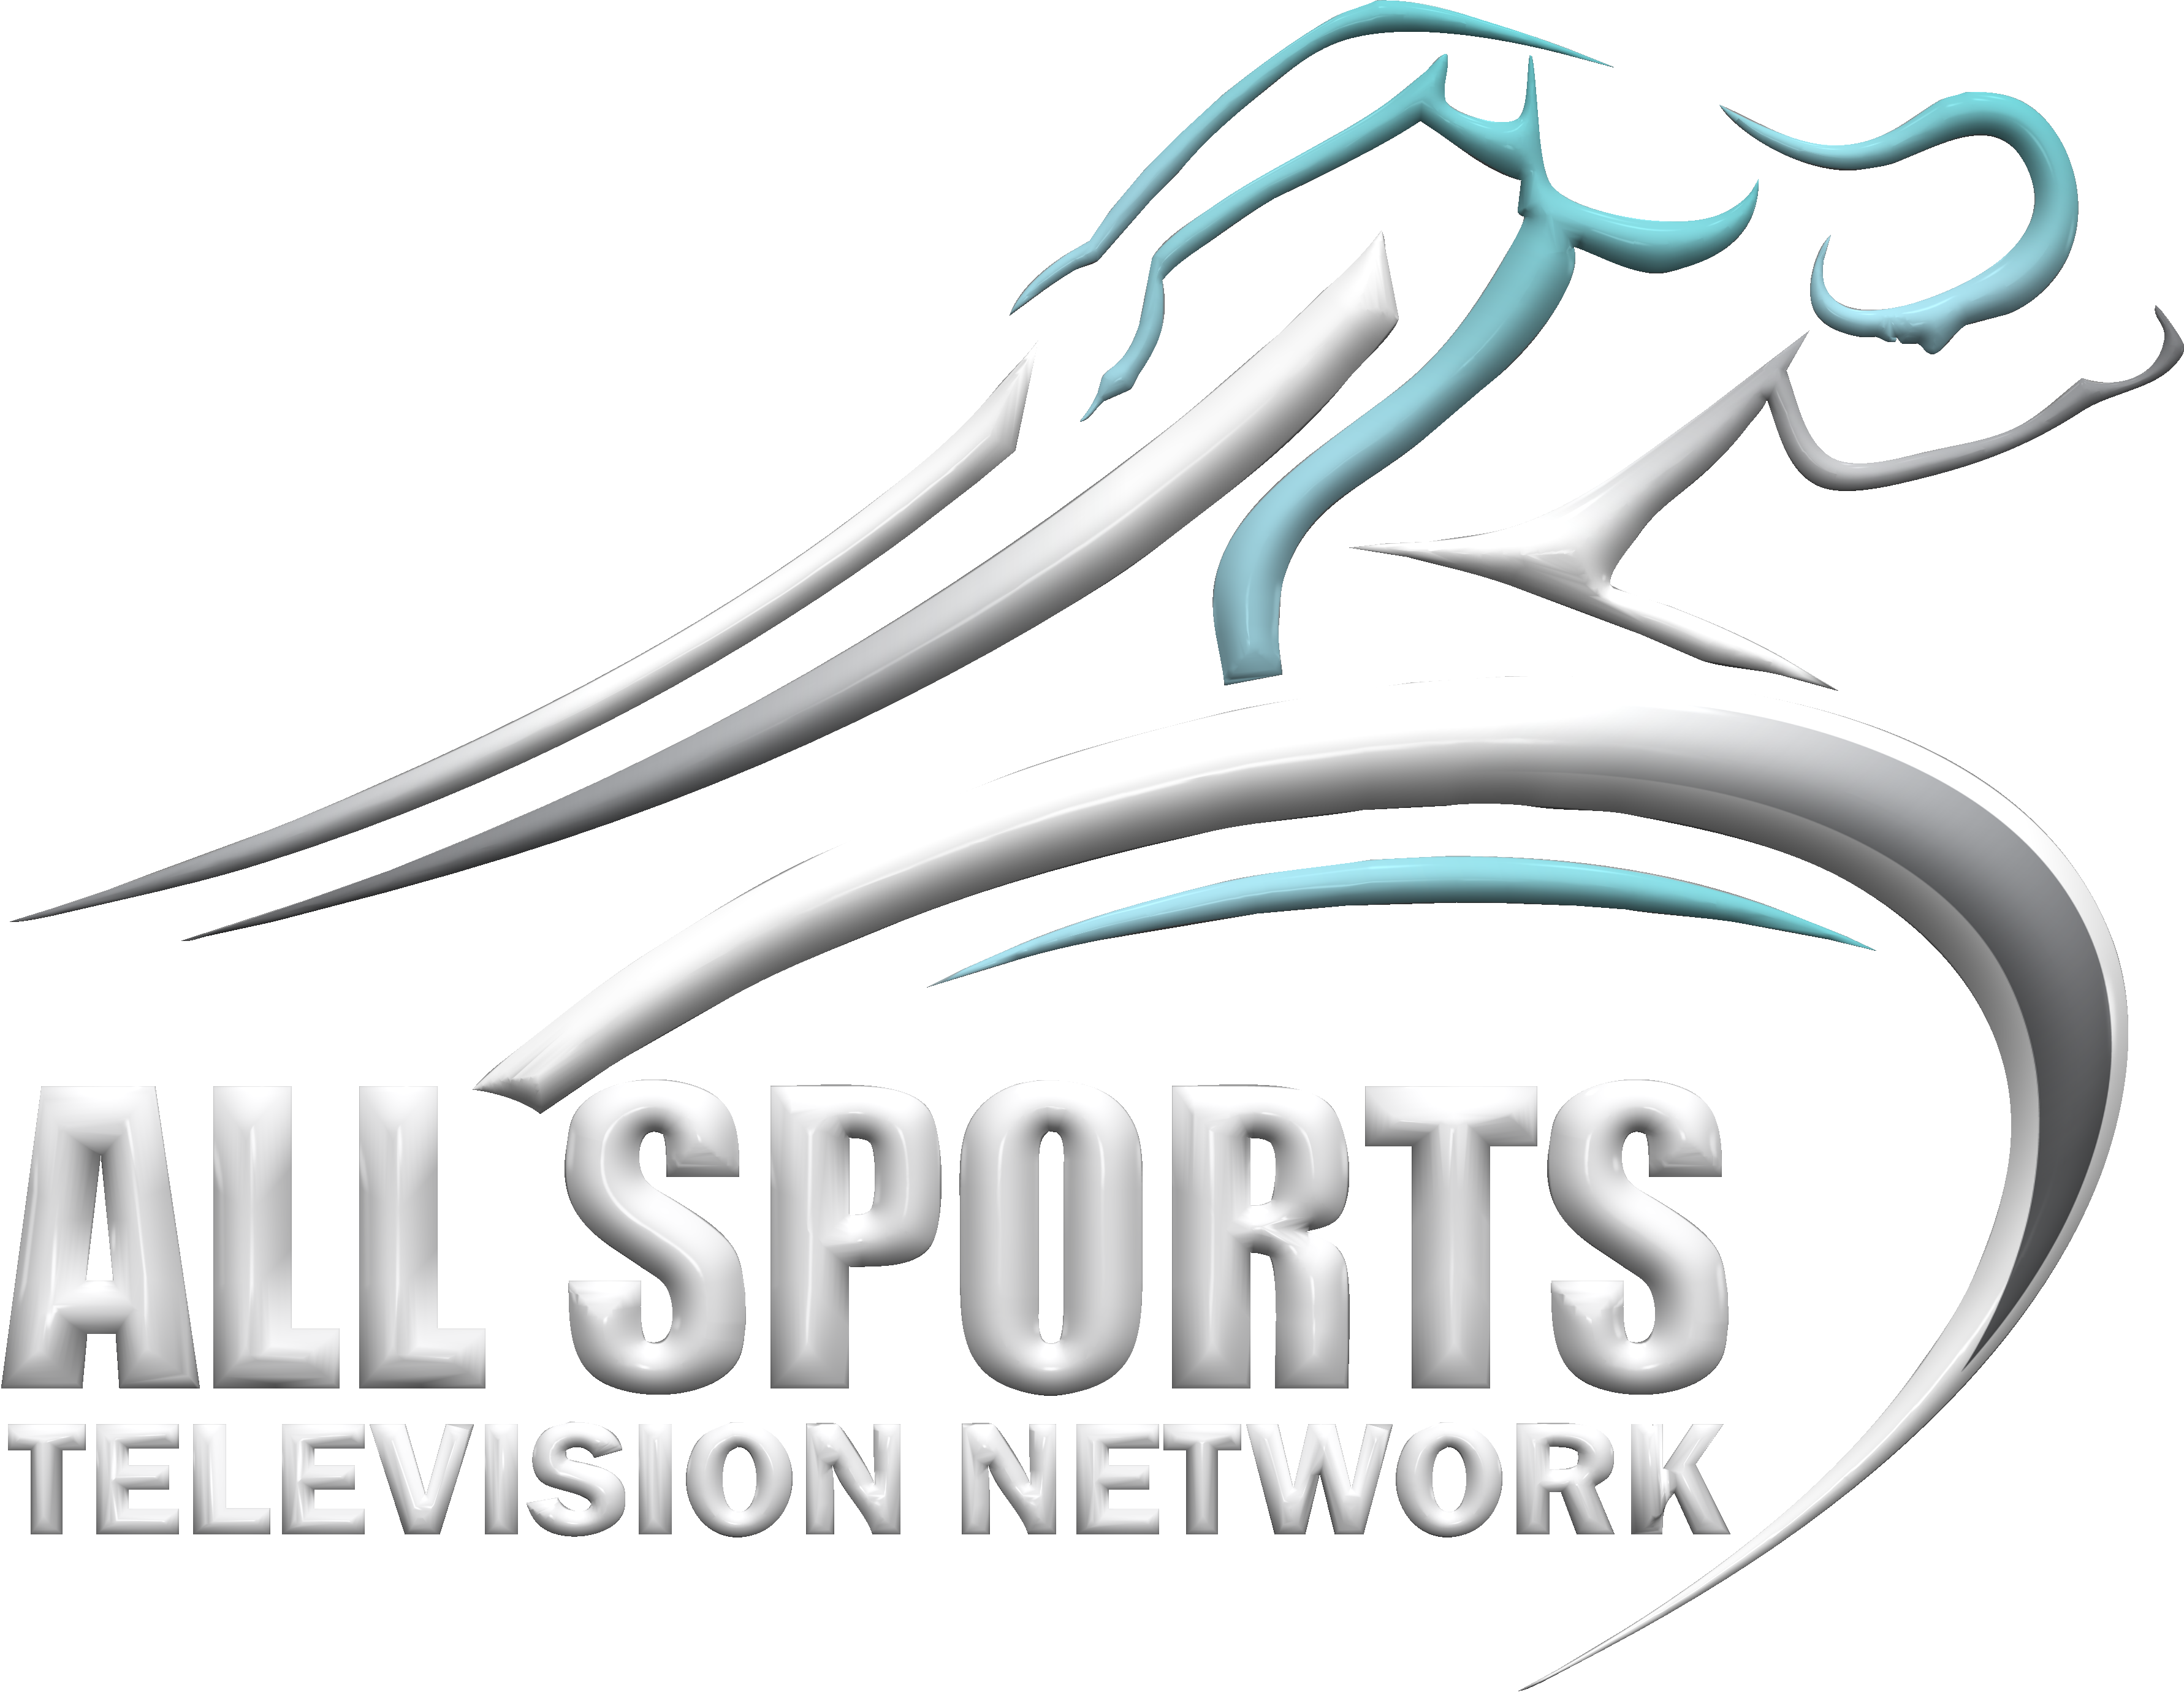 All Sports Television Network